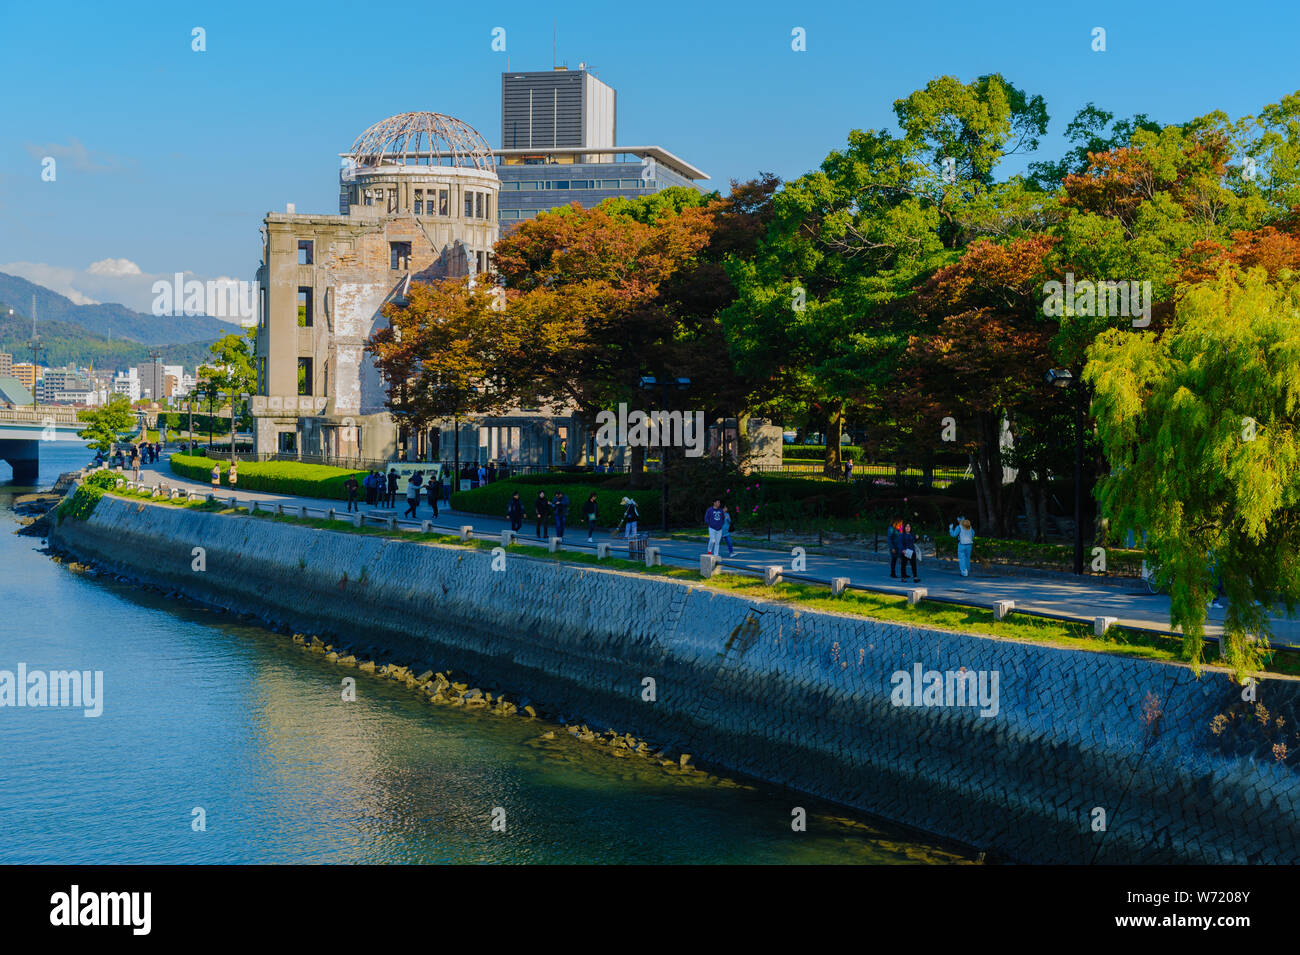 Touching visit of Hiroshima Peace Park sjows vividly tragedy of victims suffered from nuclear weapons (Hibakusaha), Japan November 2018 Stock Photo